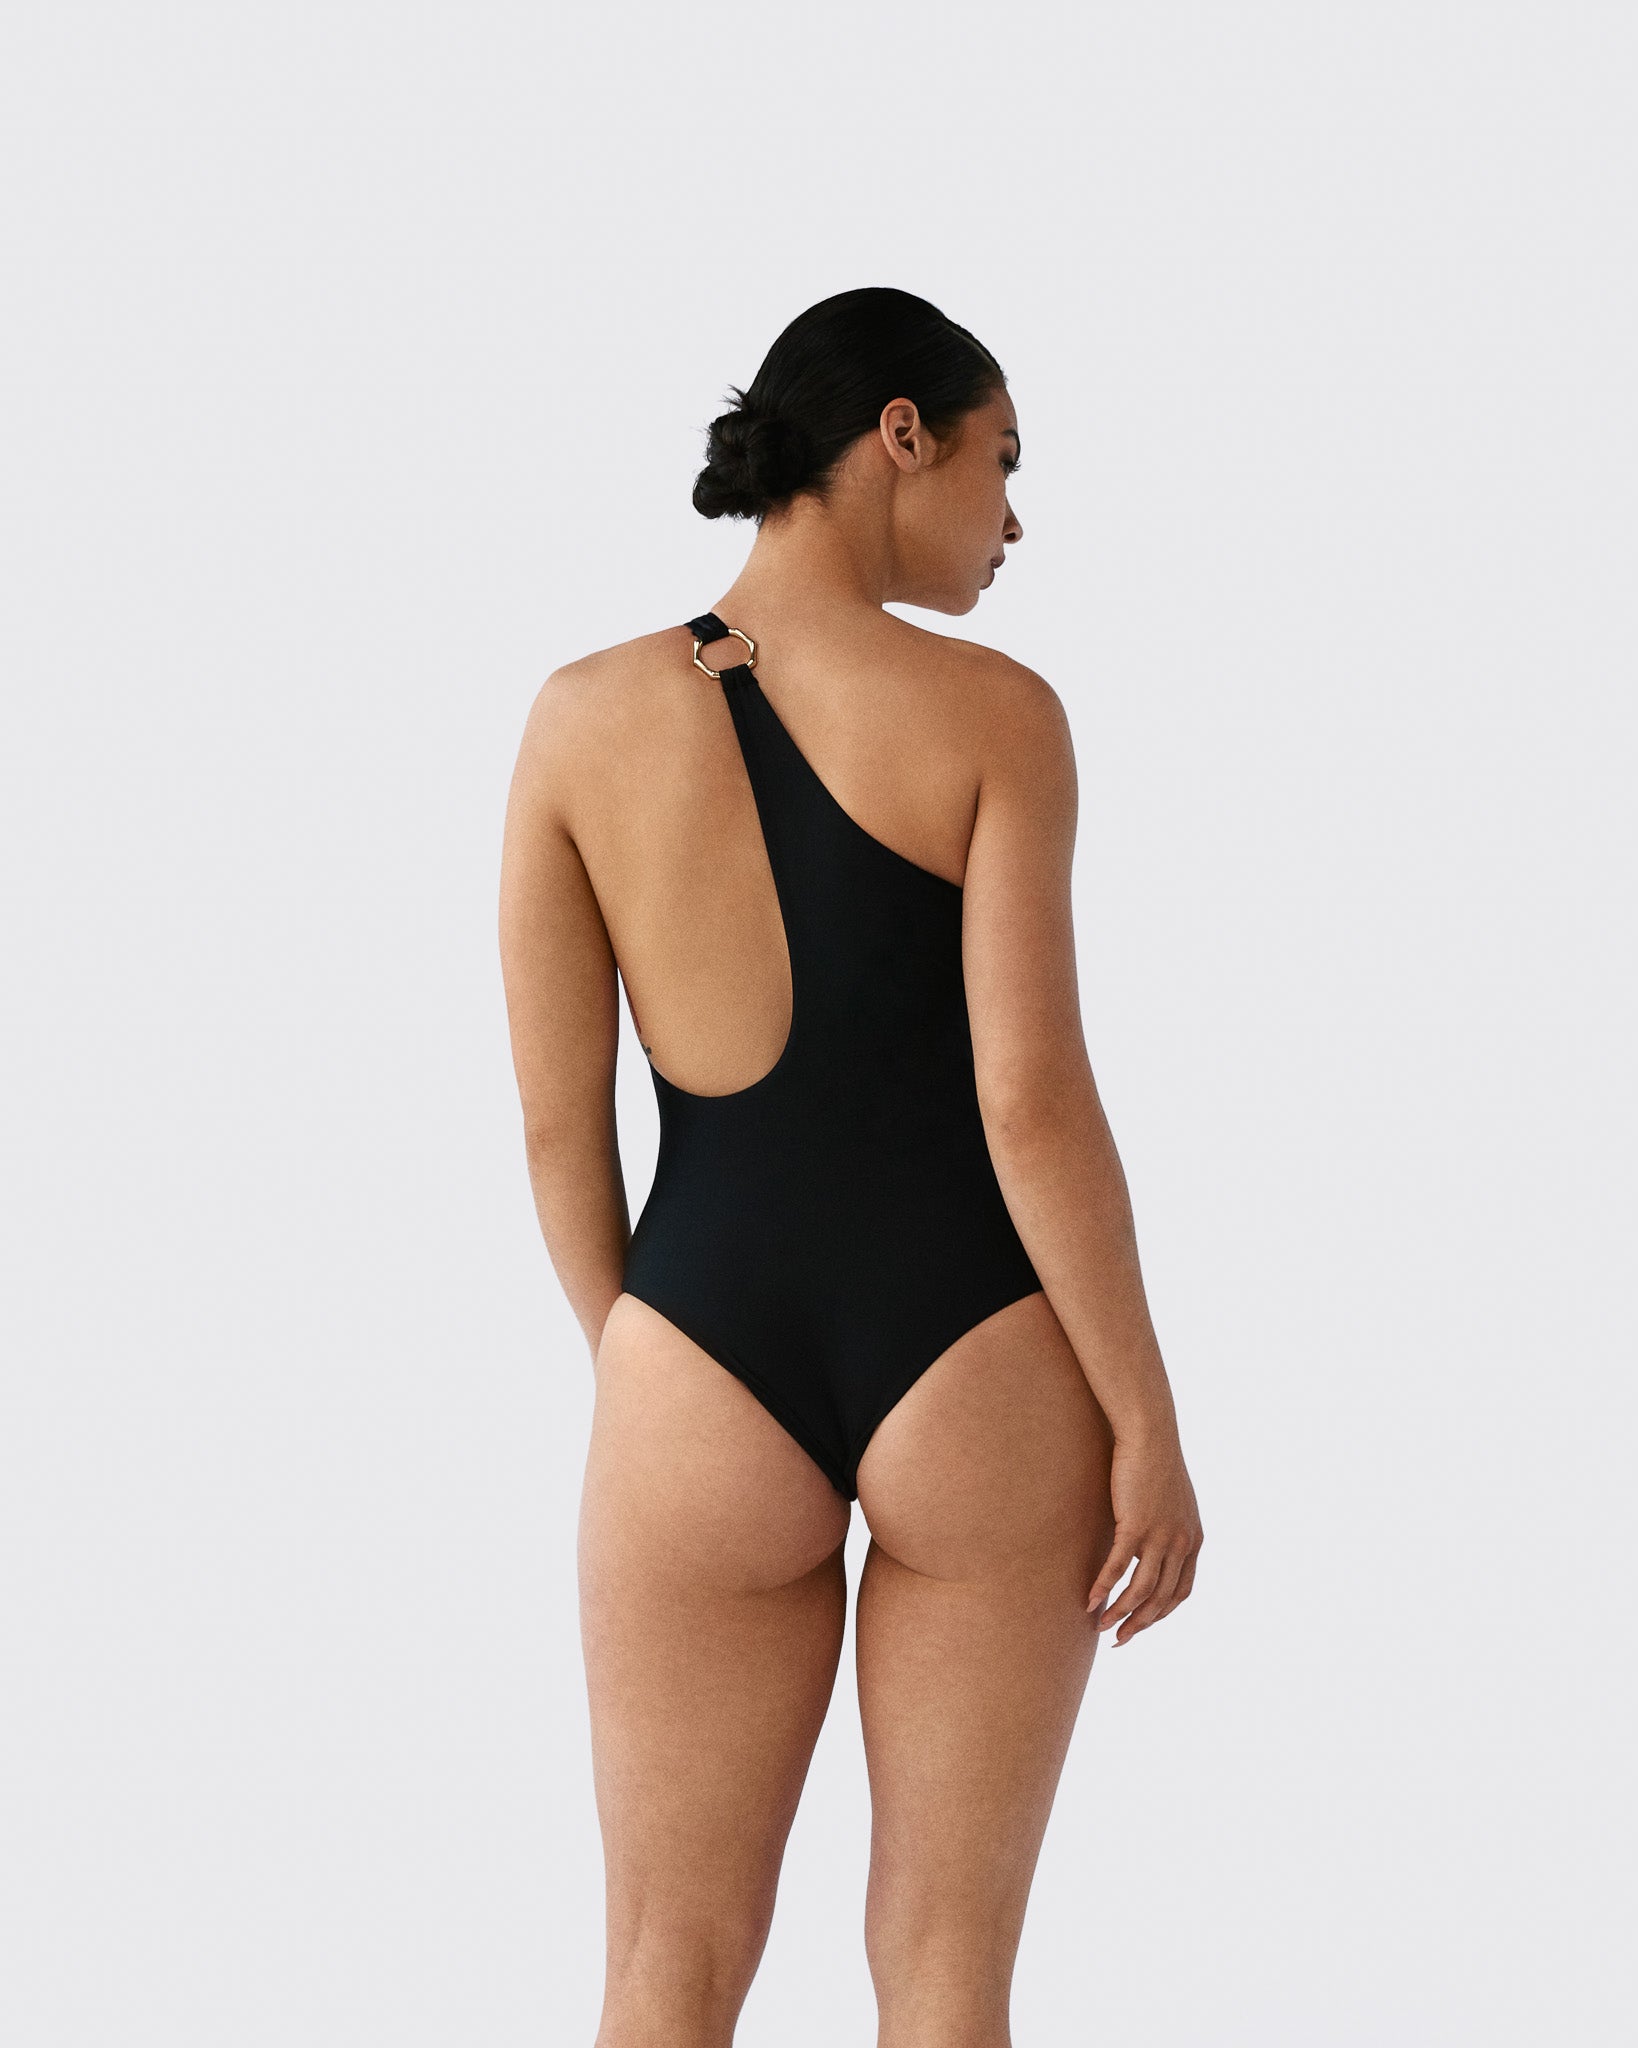 Shop One Piece Leotards and Swimwear - B you – B You Active